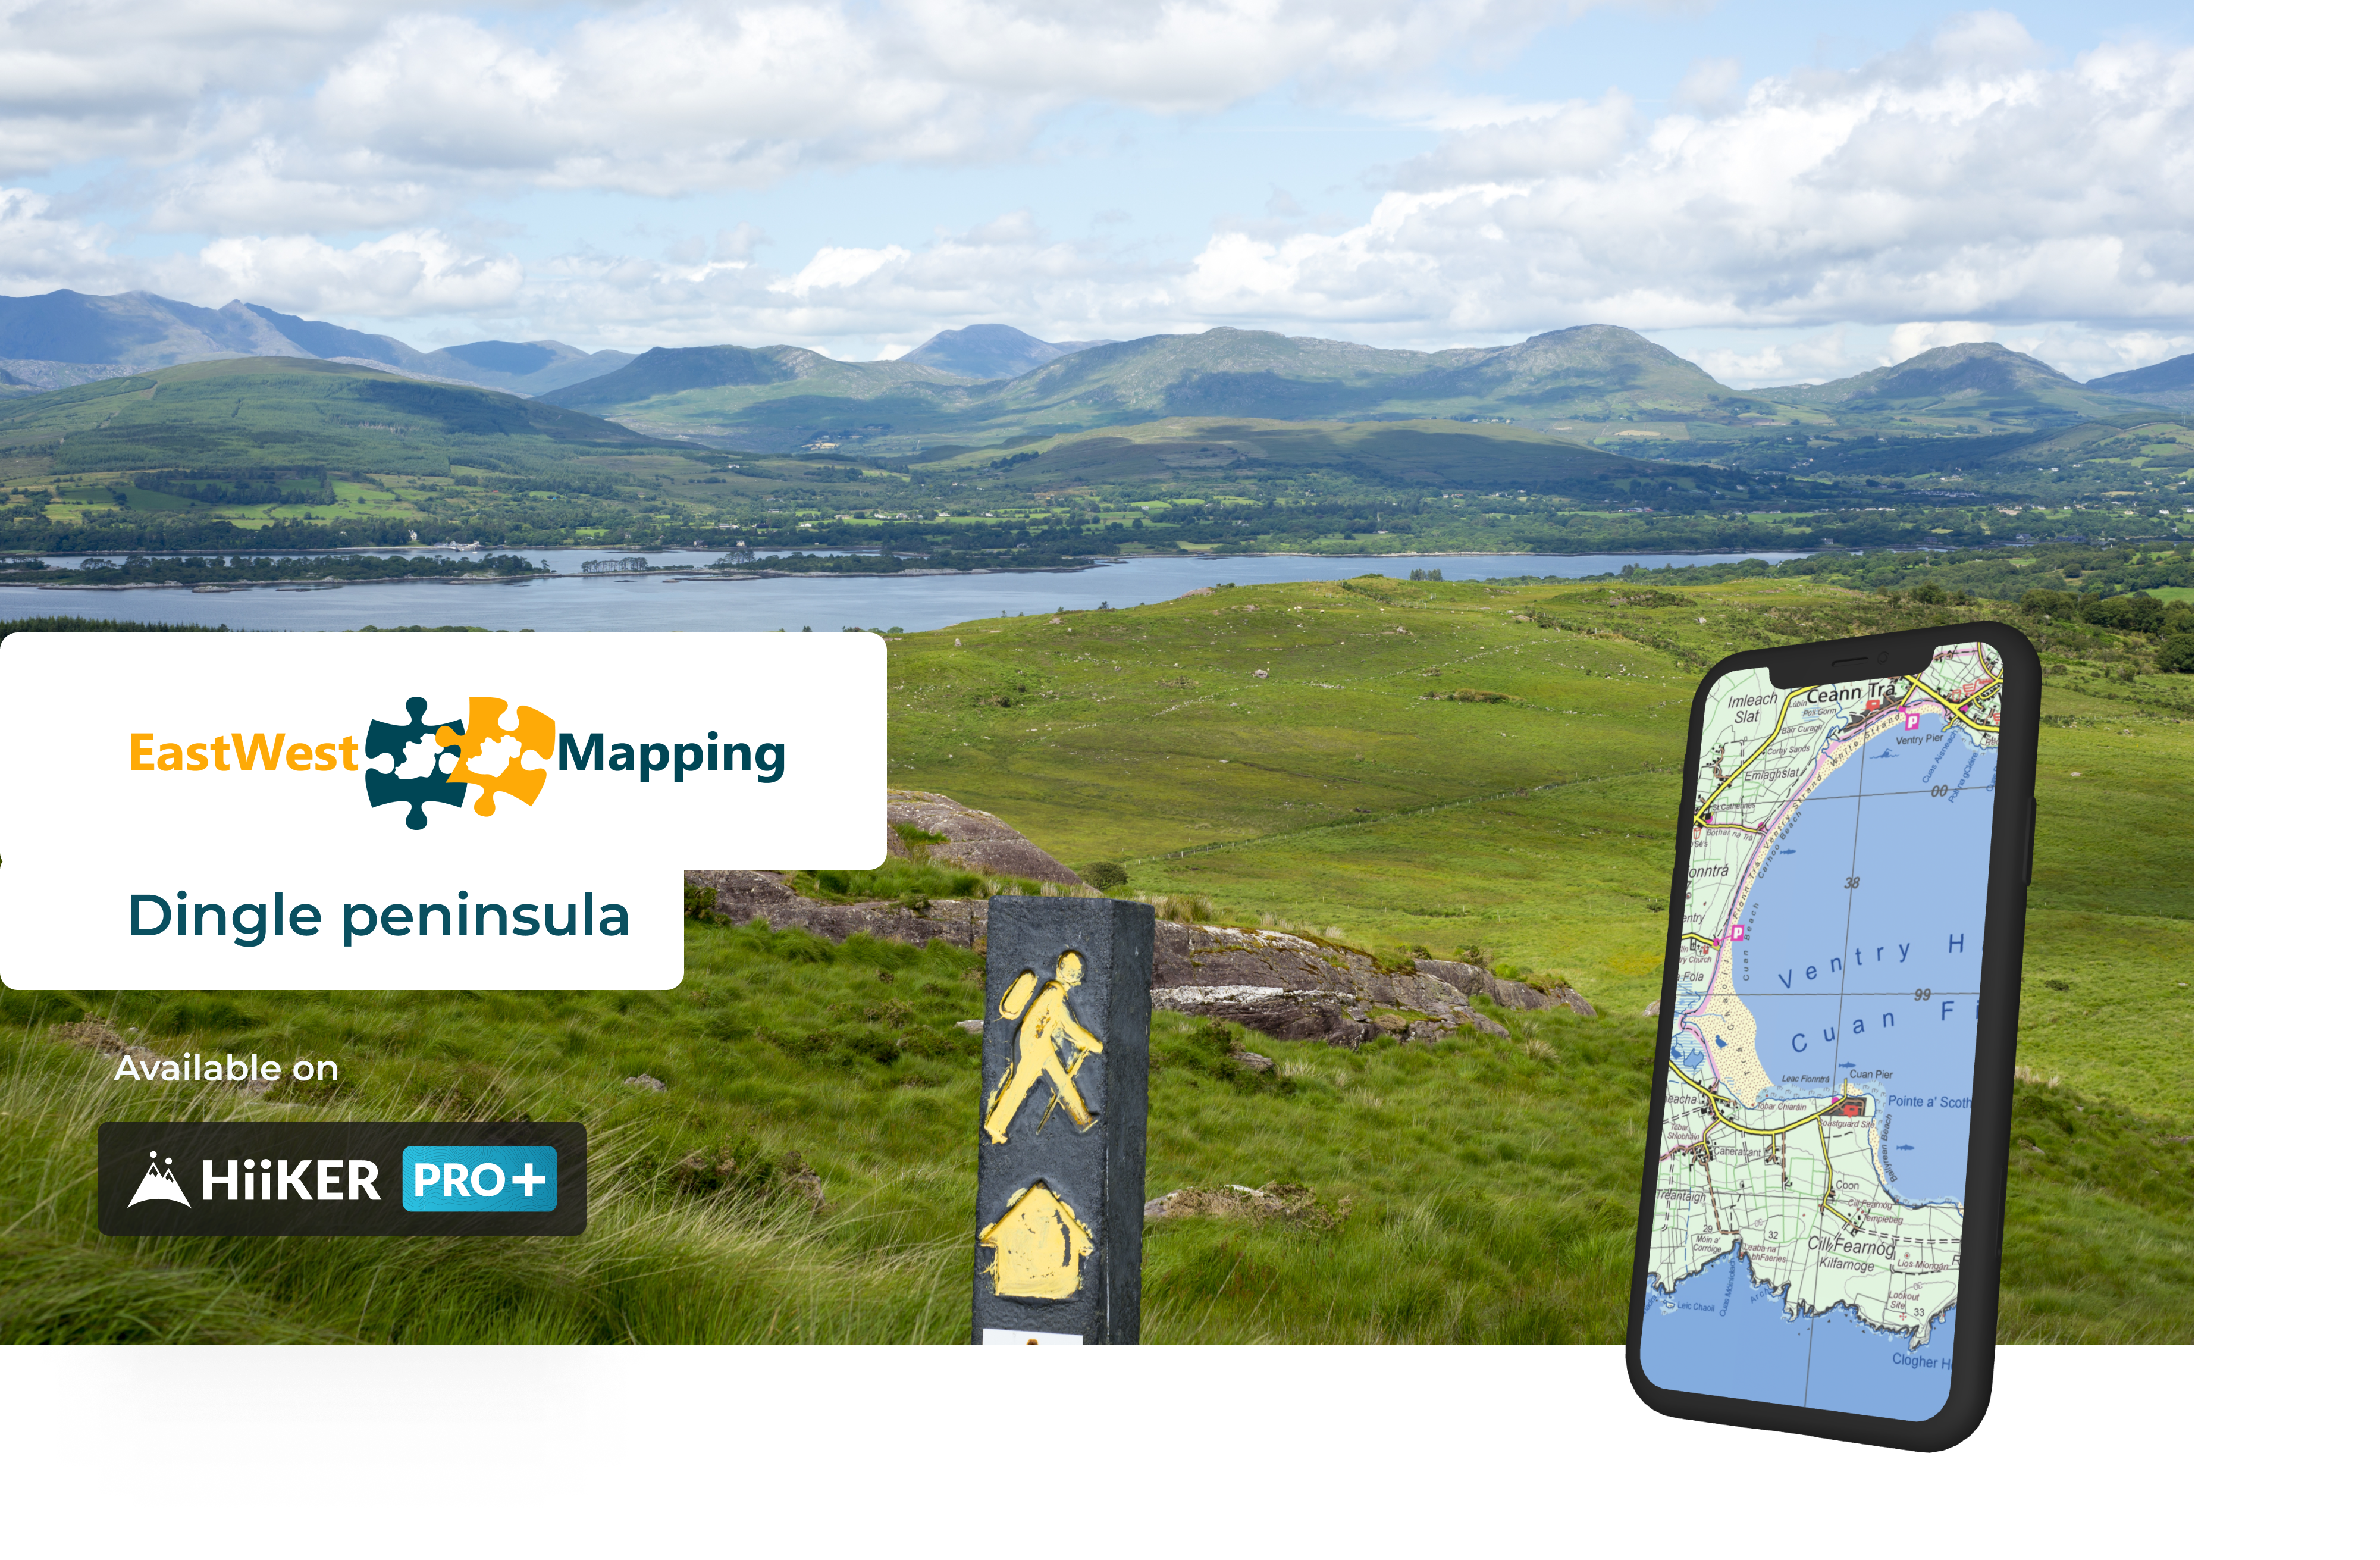 Exclusive: EastWest Mapping’s Dingle Peninsula Maps on HiiKER! picture